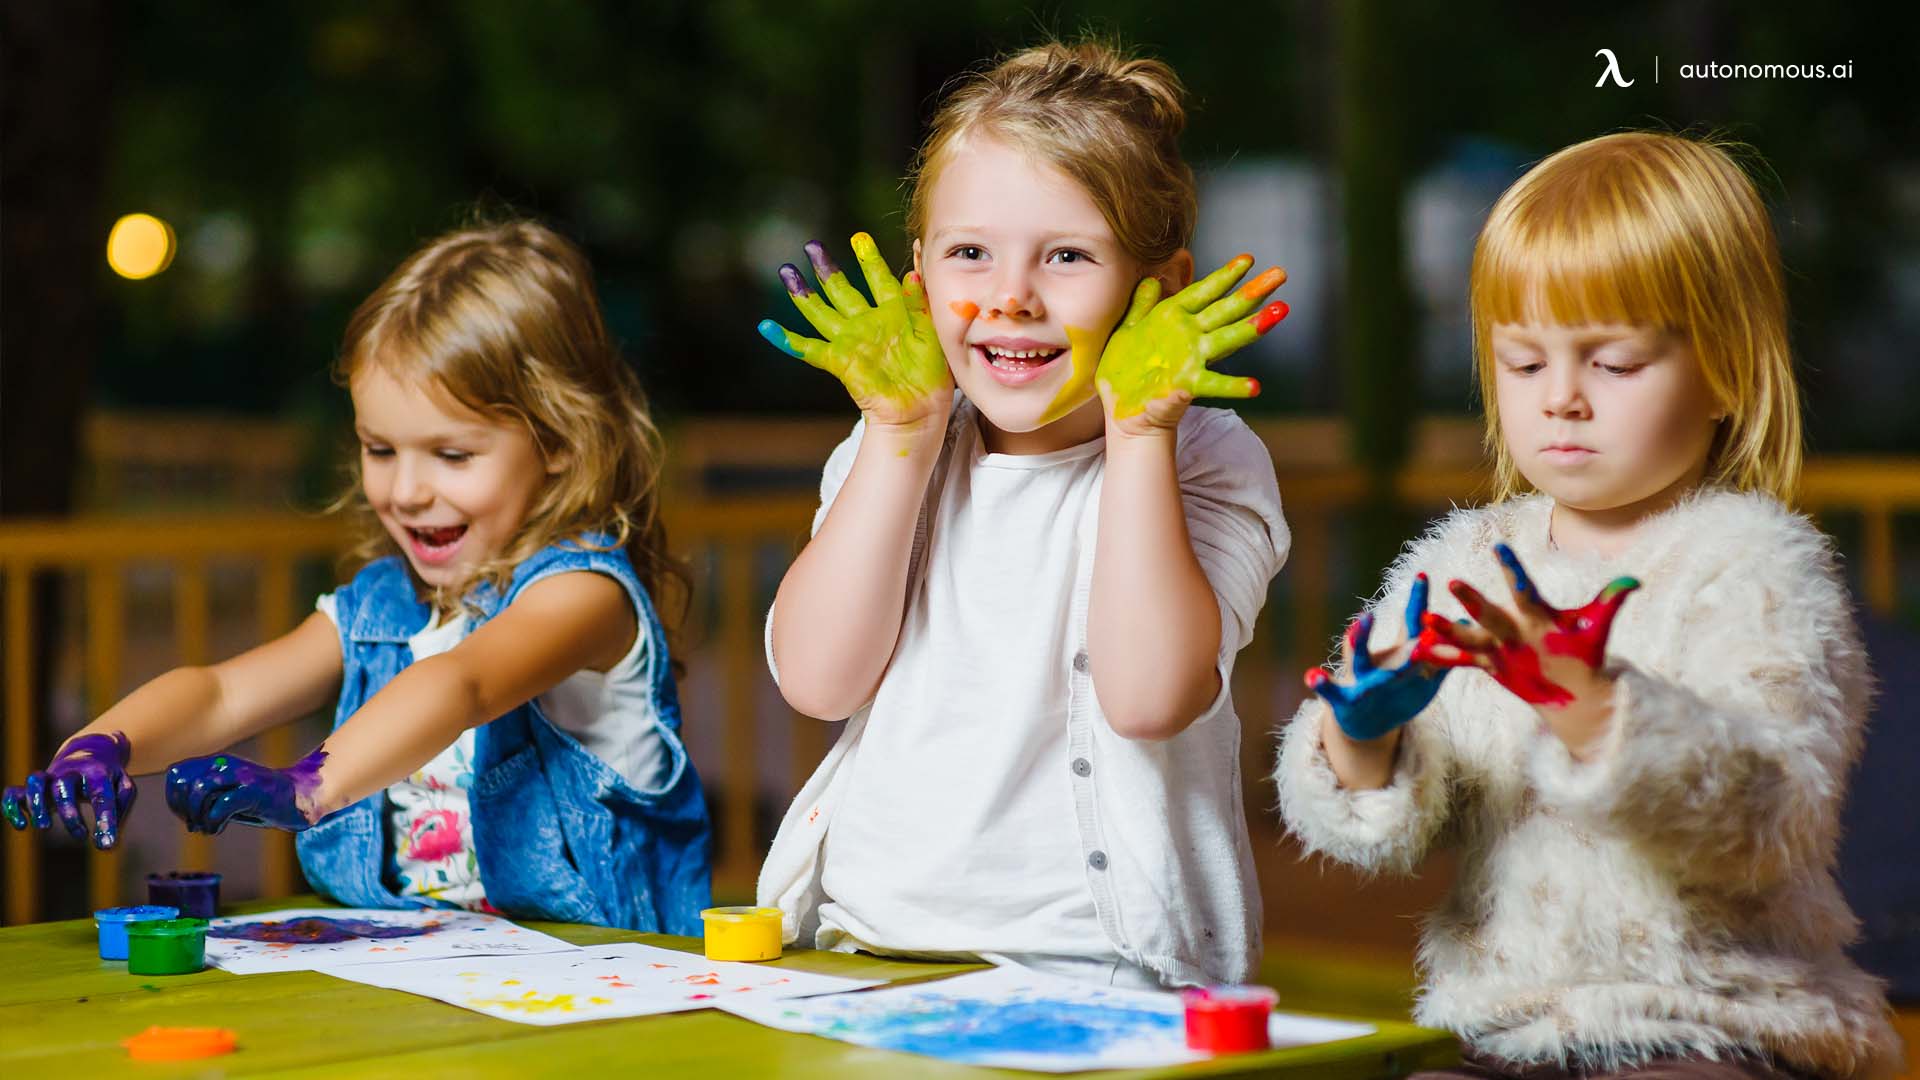 13 Fun Summer Activities for Kids That Are Easy to Do